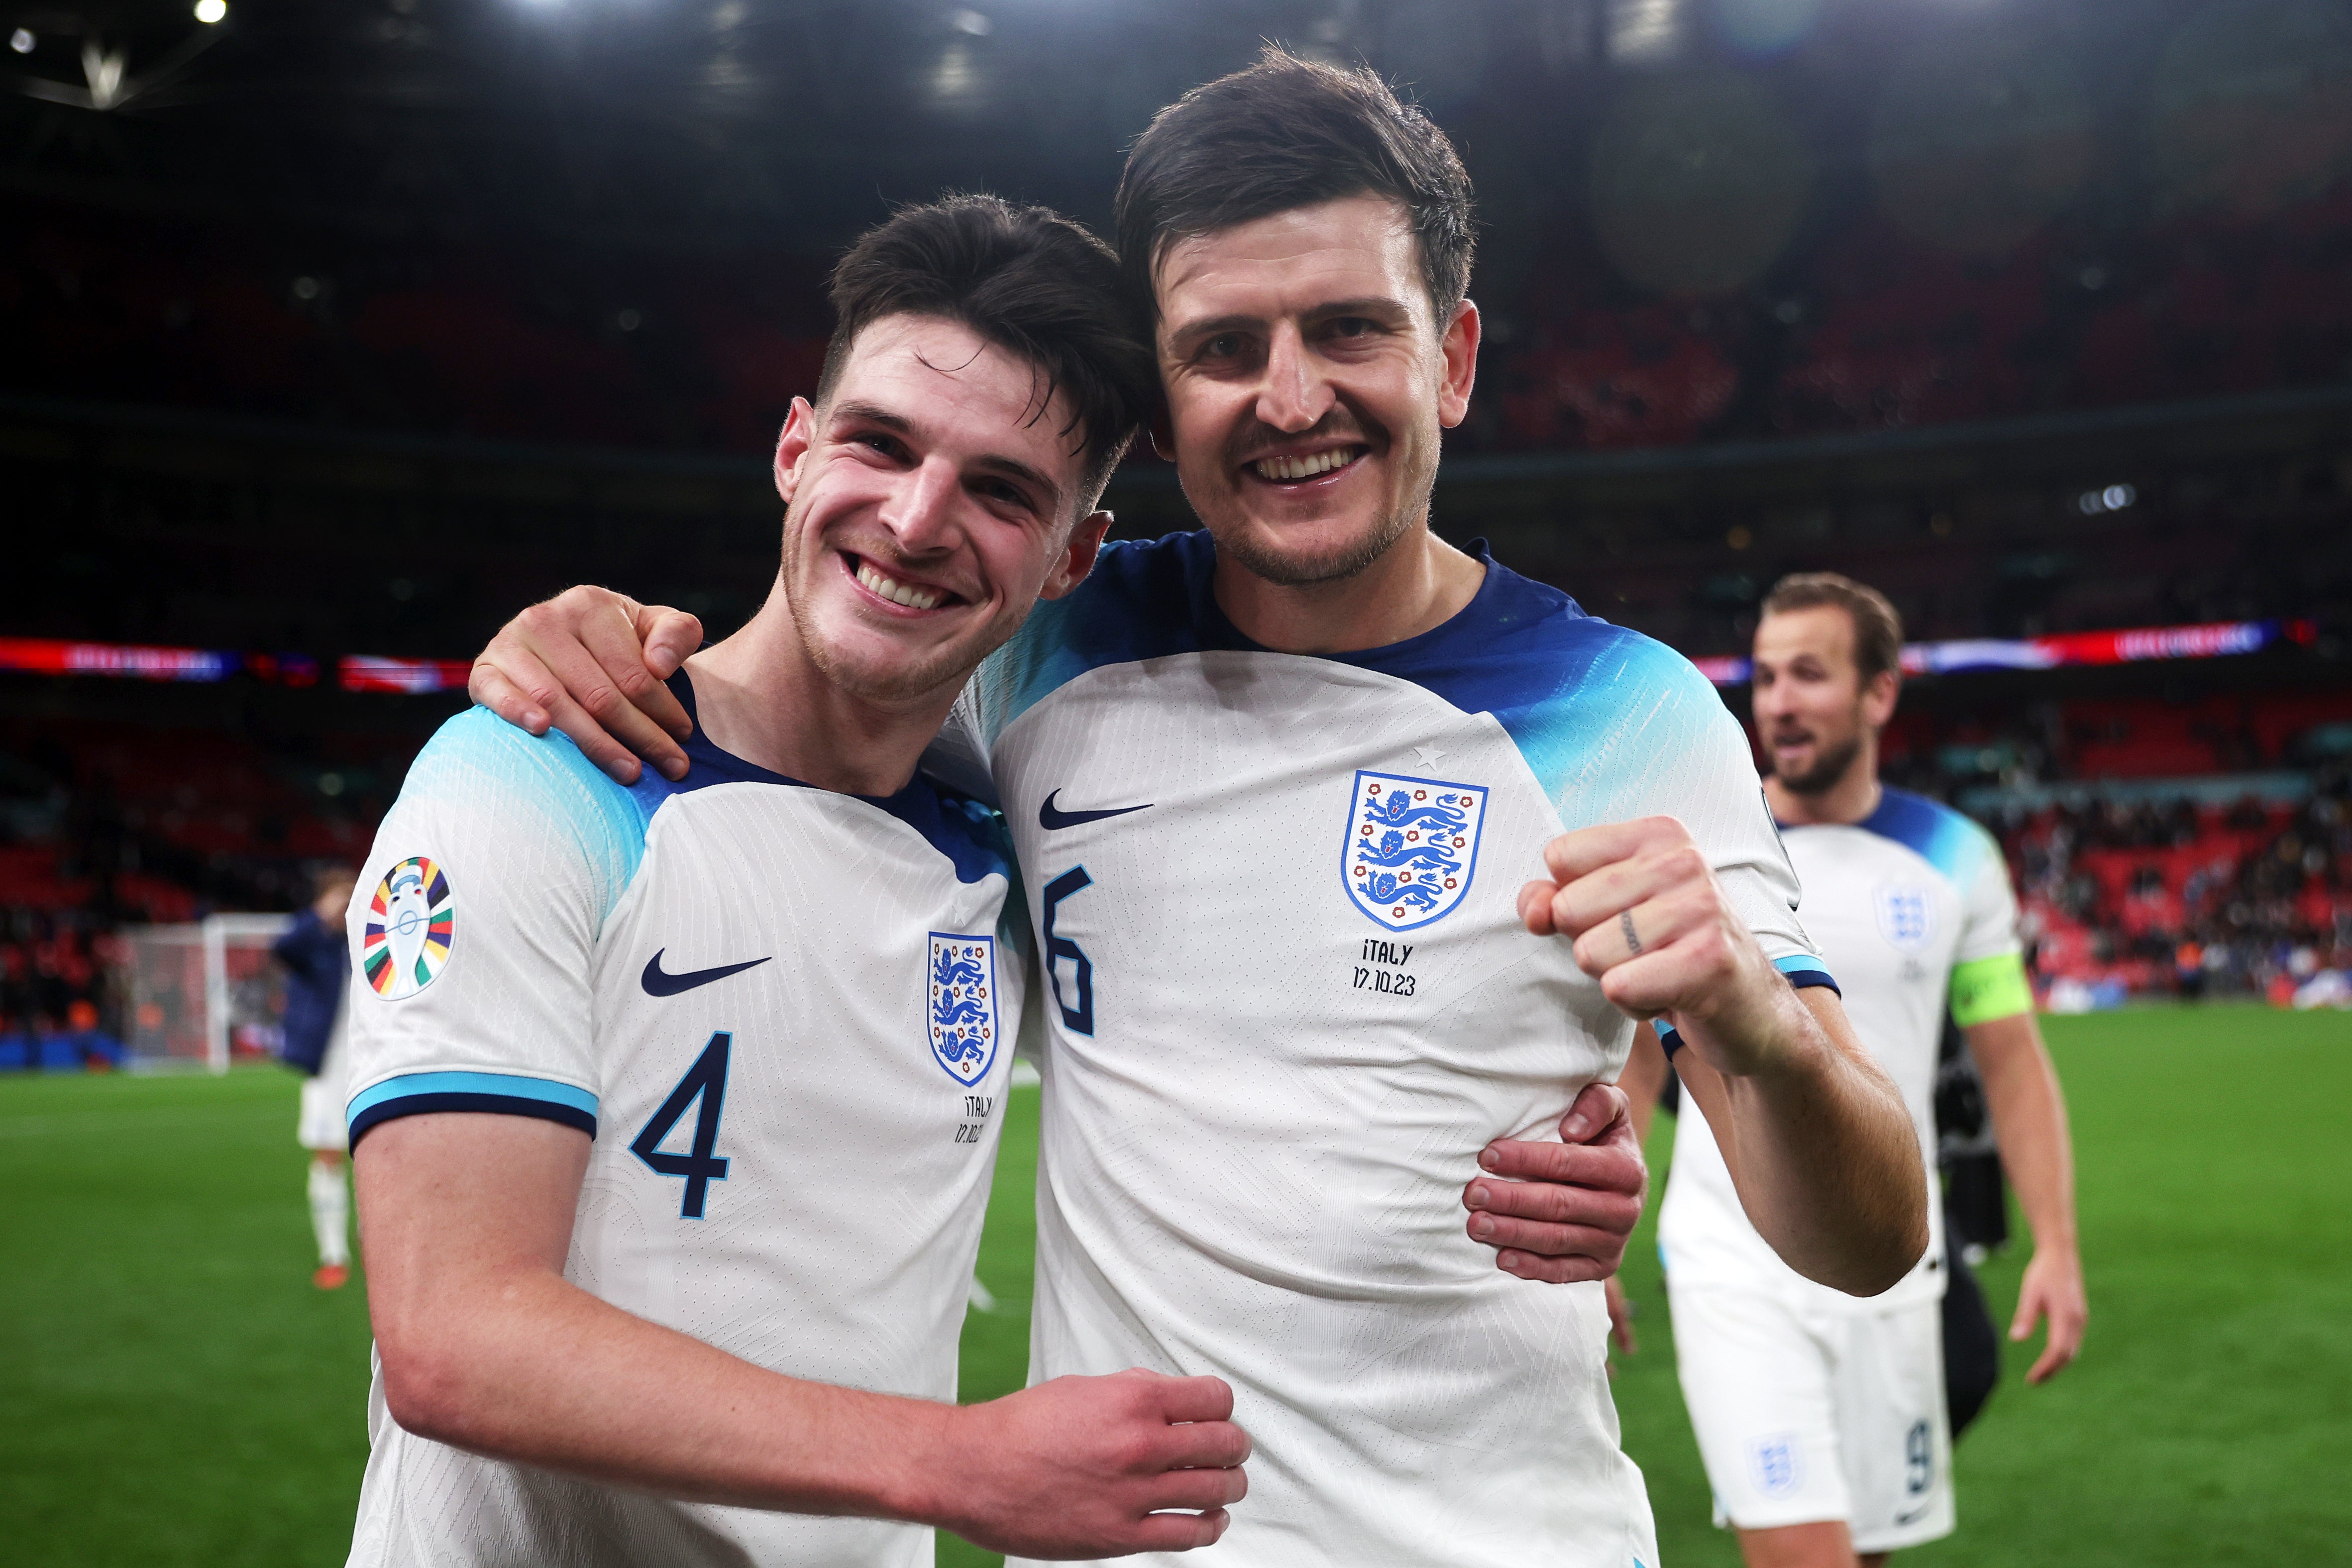 Declan Rice, left, and Harry Maguire celebrate England’s 3-1 win over Italy, which sealed qualification for Euro 2024 in Germany